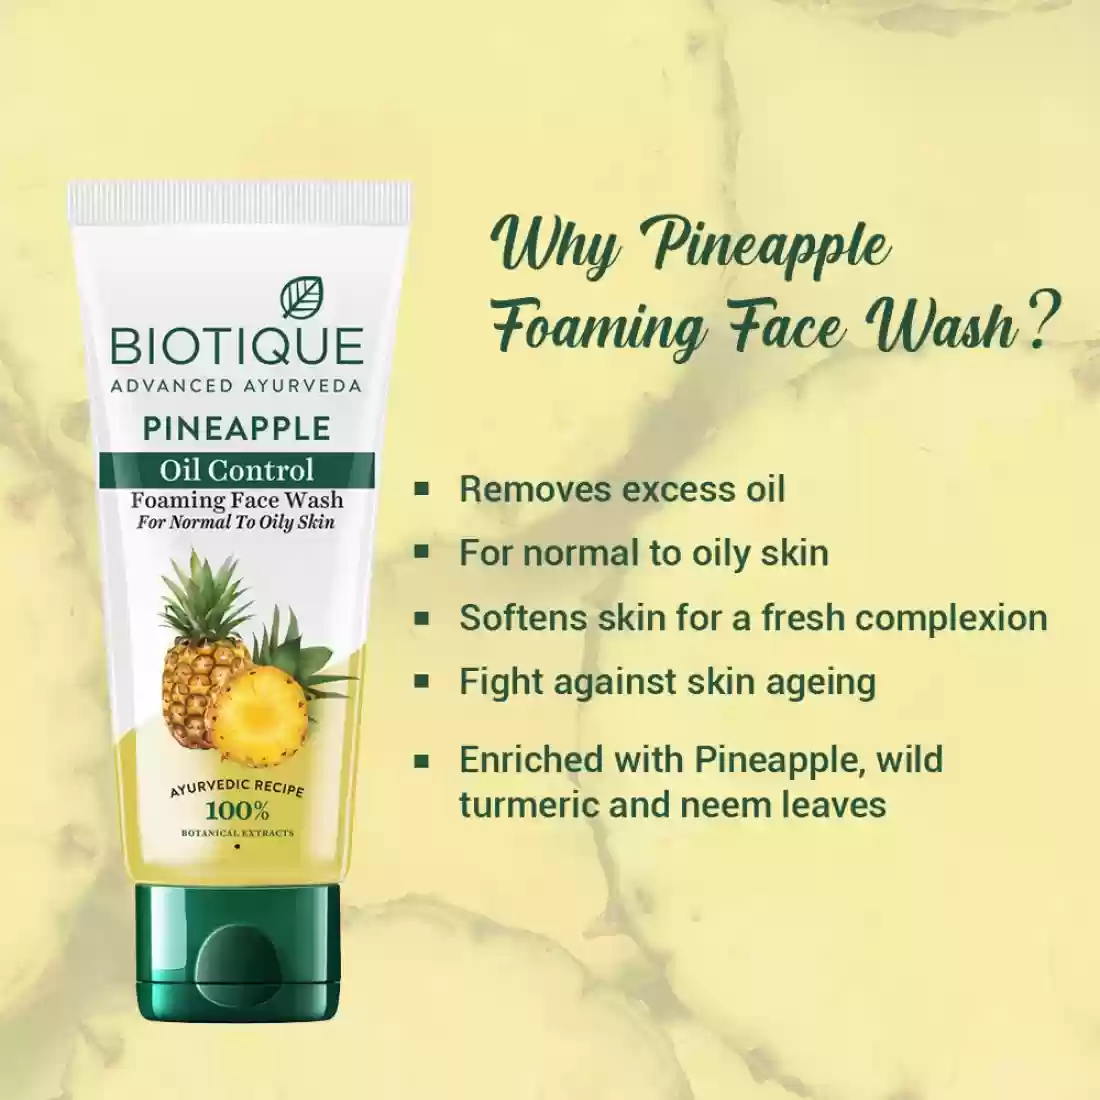 BIOTIQUE Face  Body Combo-Pineapple Oil Control Foaming   Apricot Body Wash Face Wash (200 G)